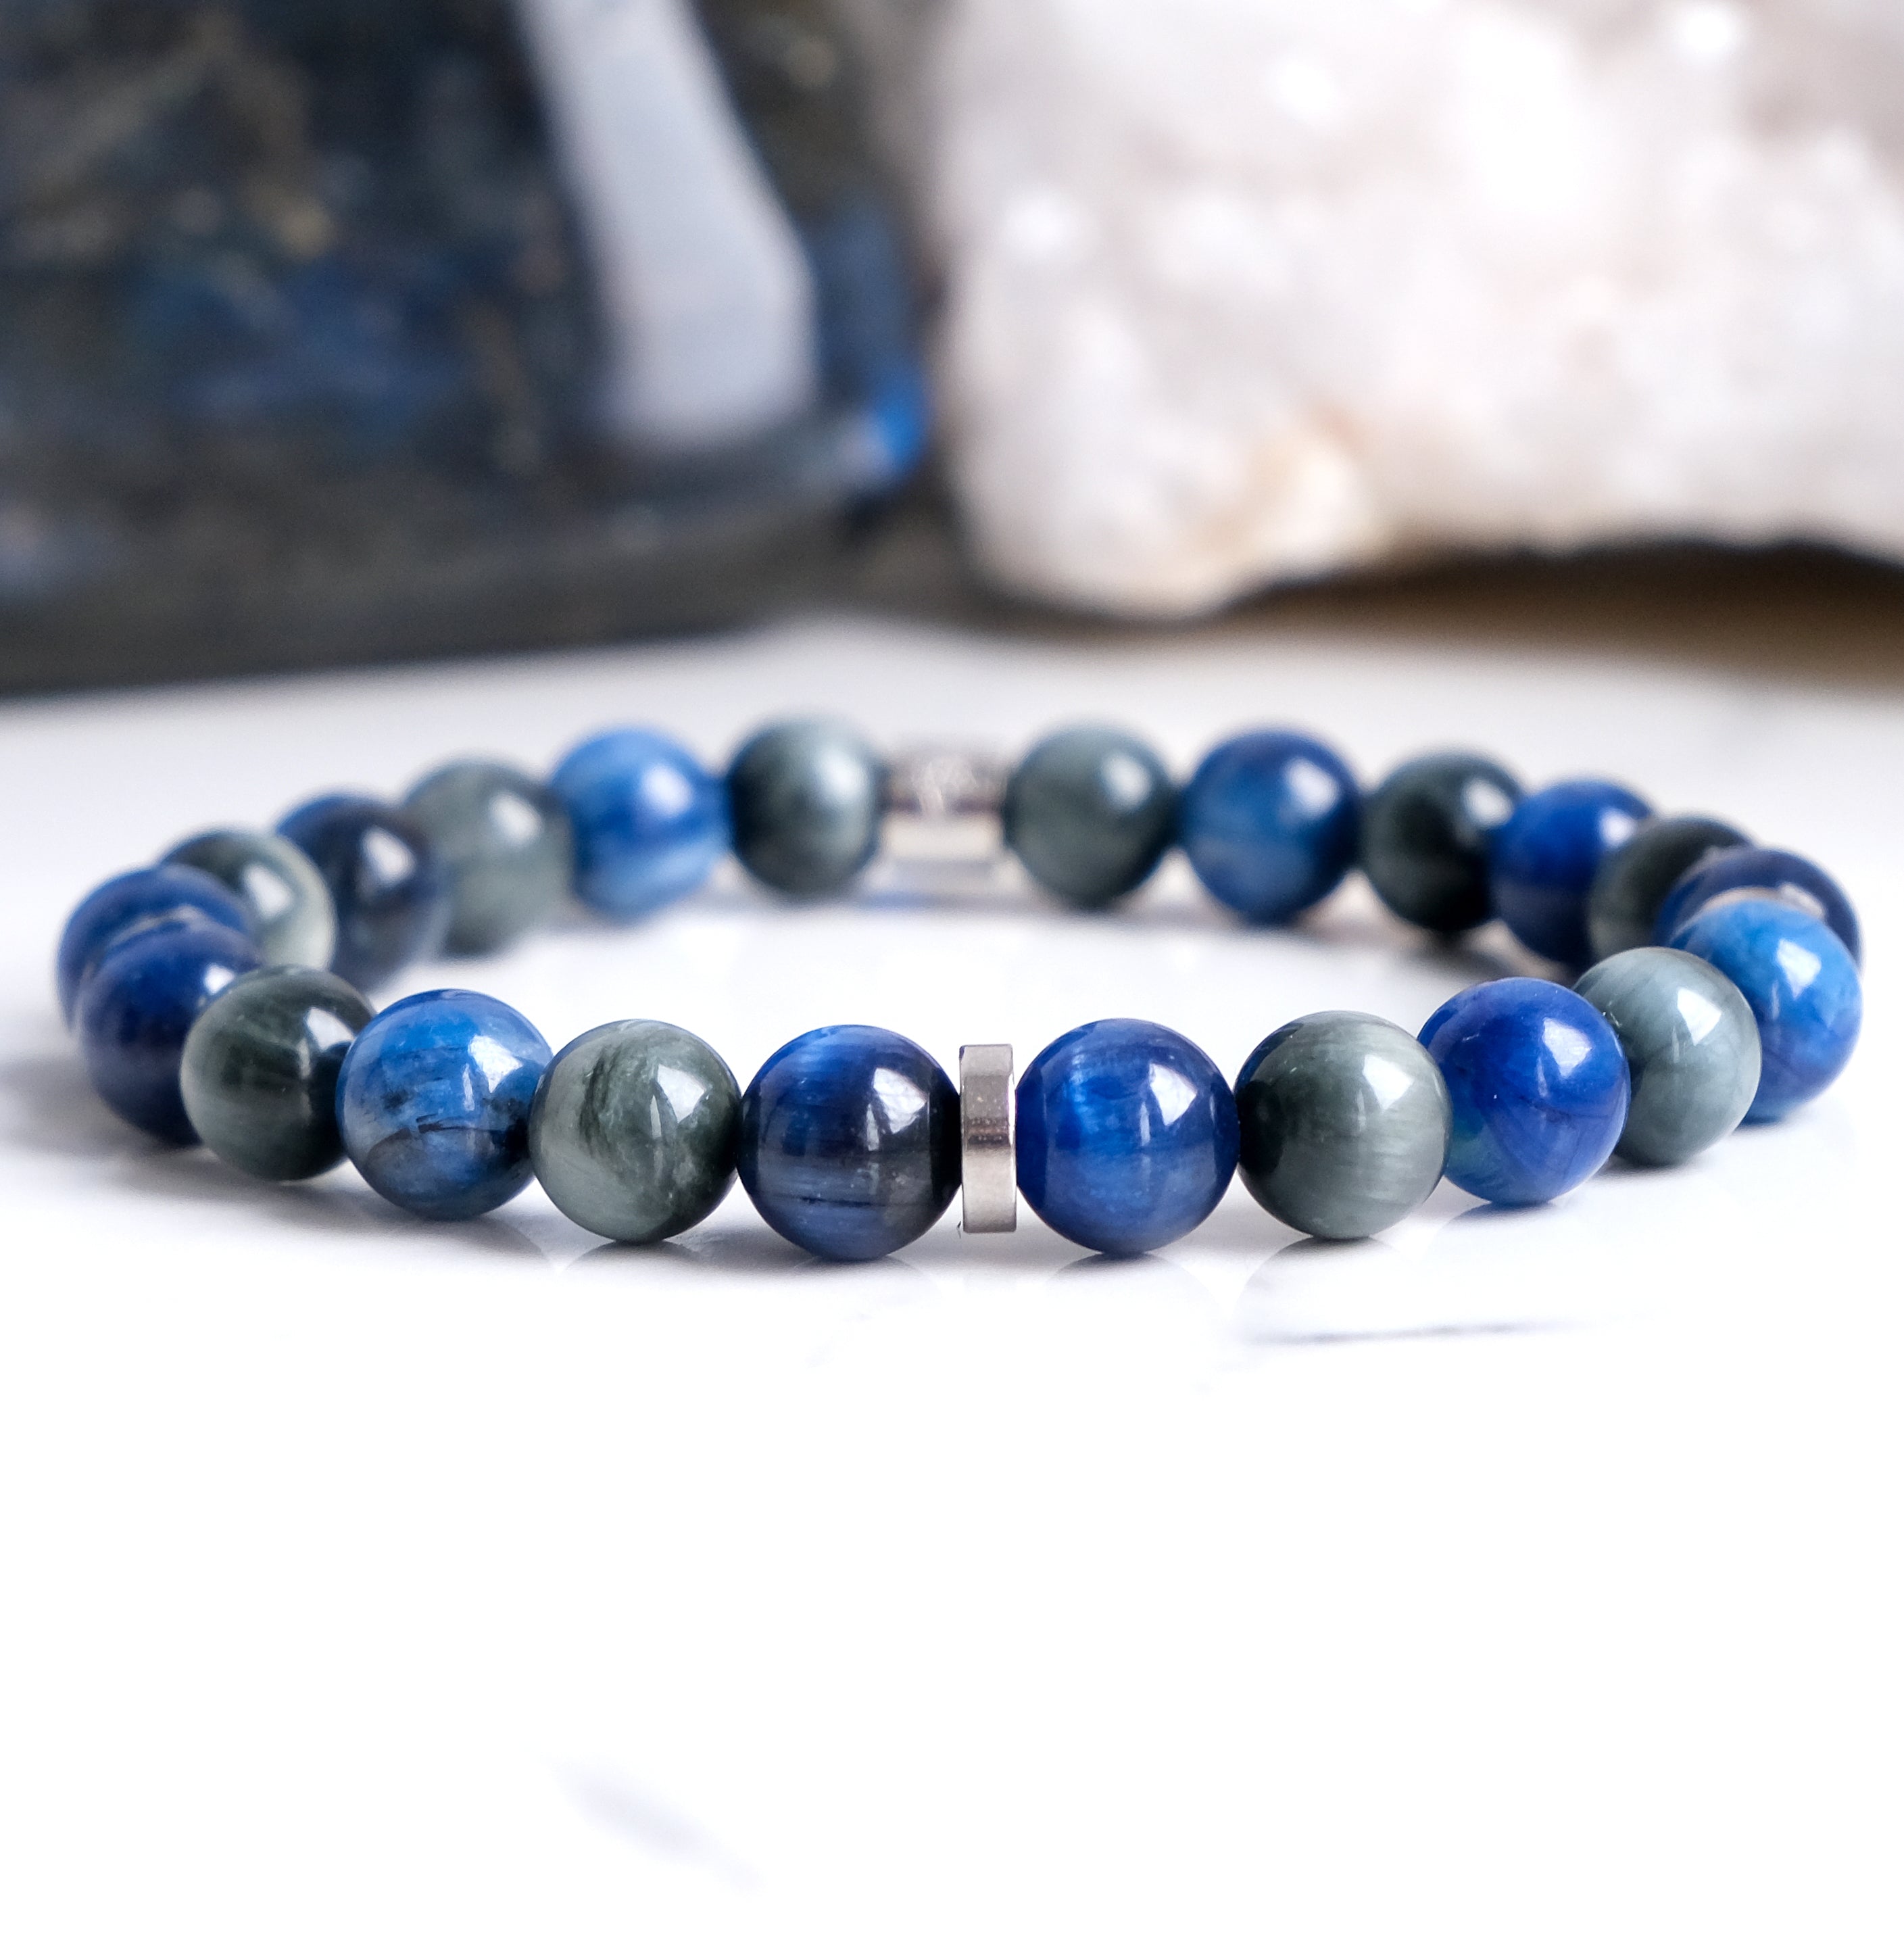 Kyanite and eagle eye gemstone bracelet with stainless steel accessories